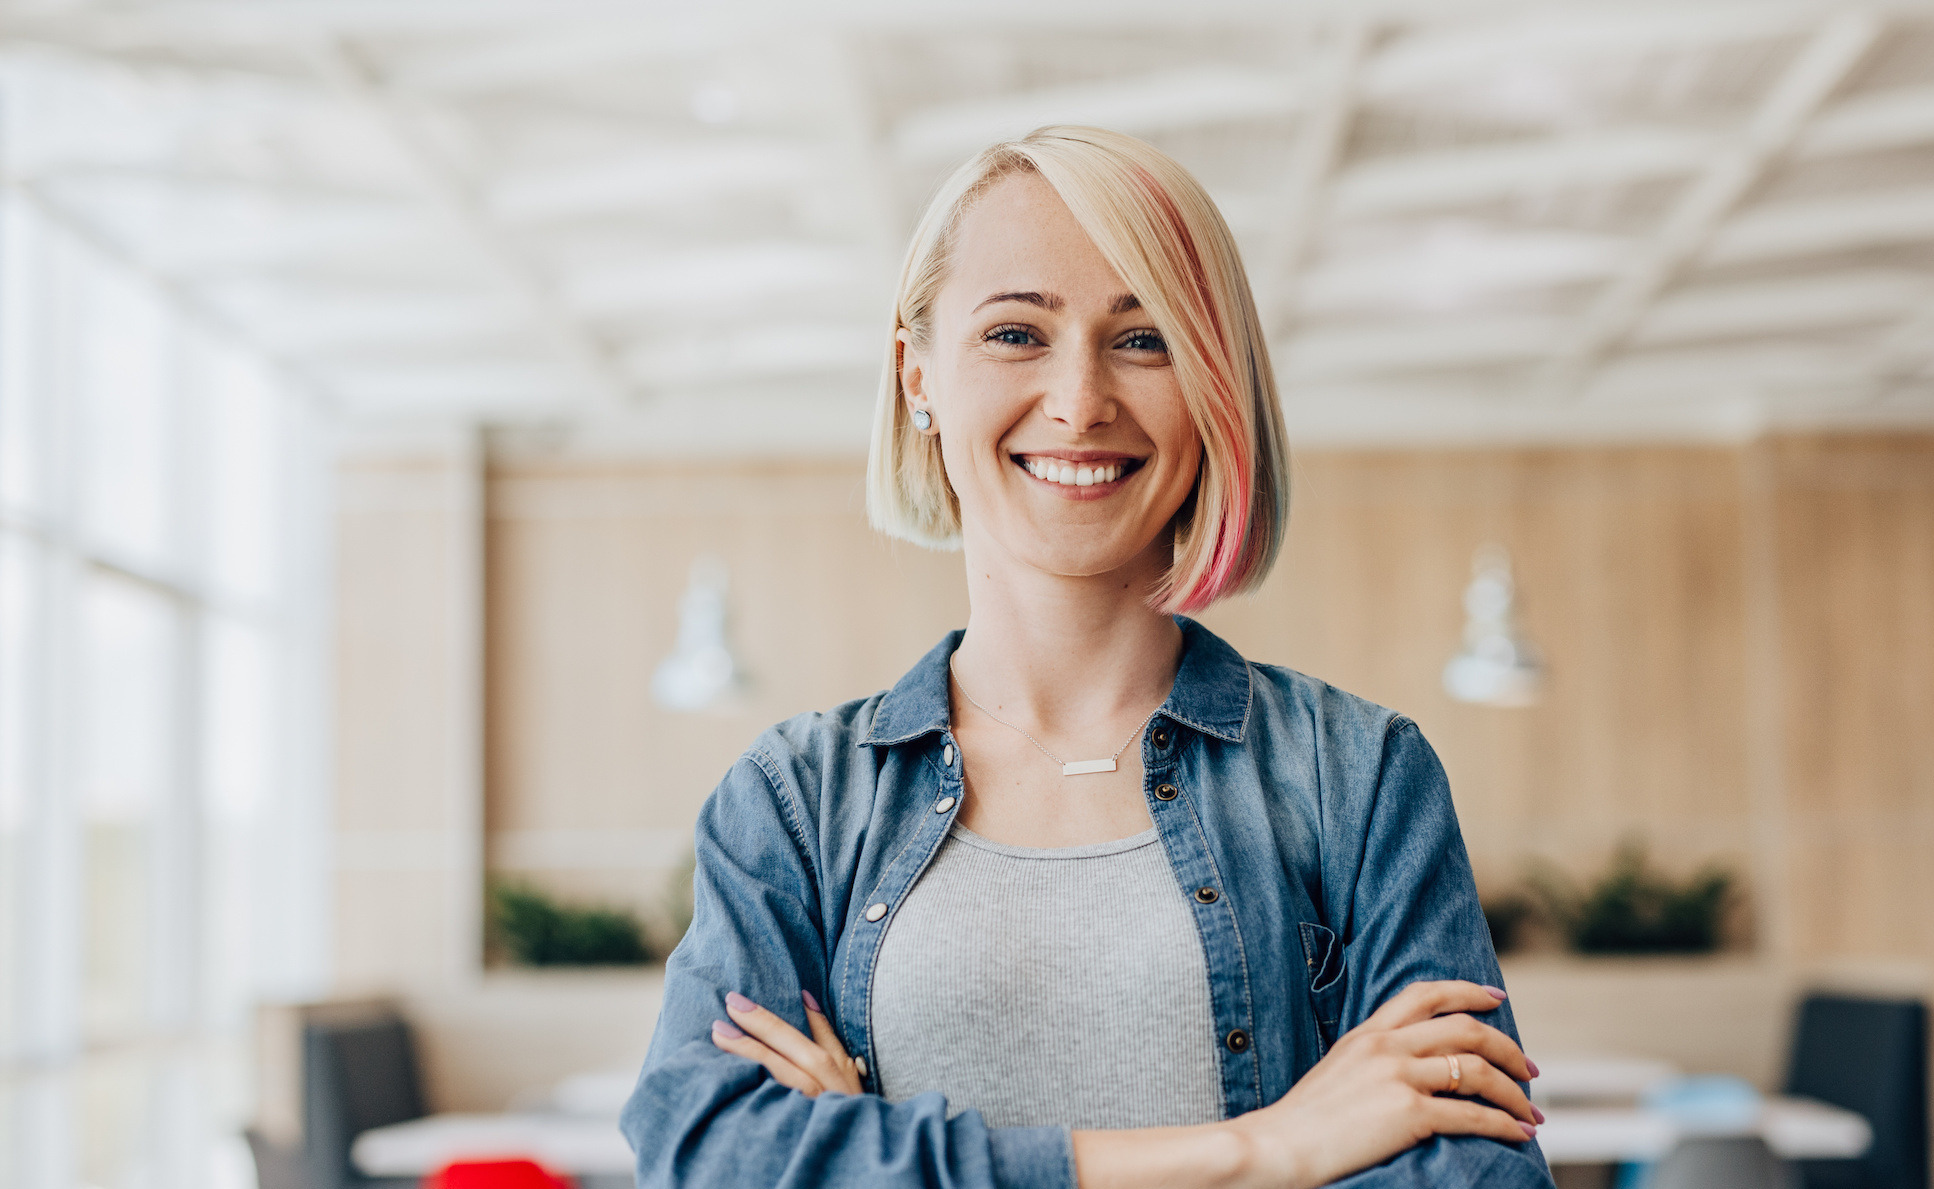 A smiling blonde woman in an office